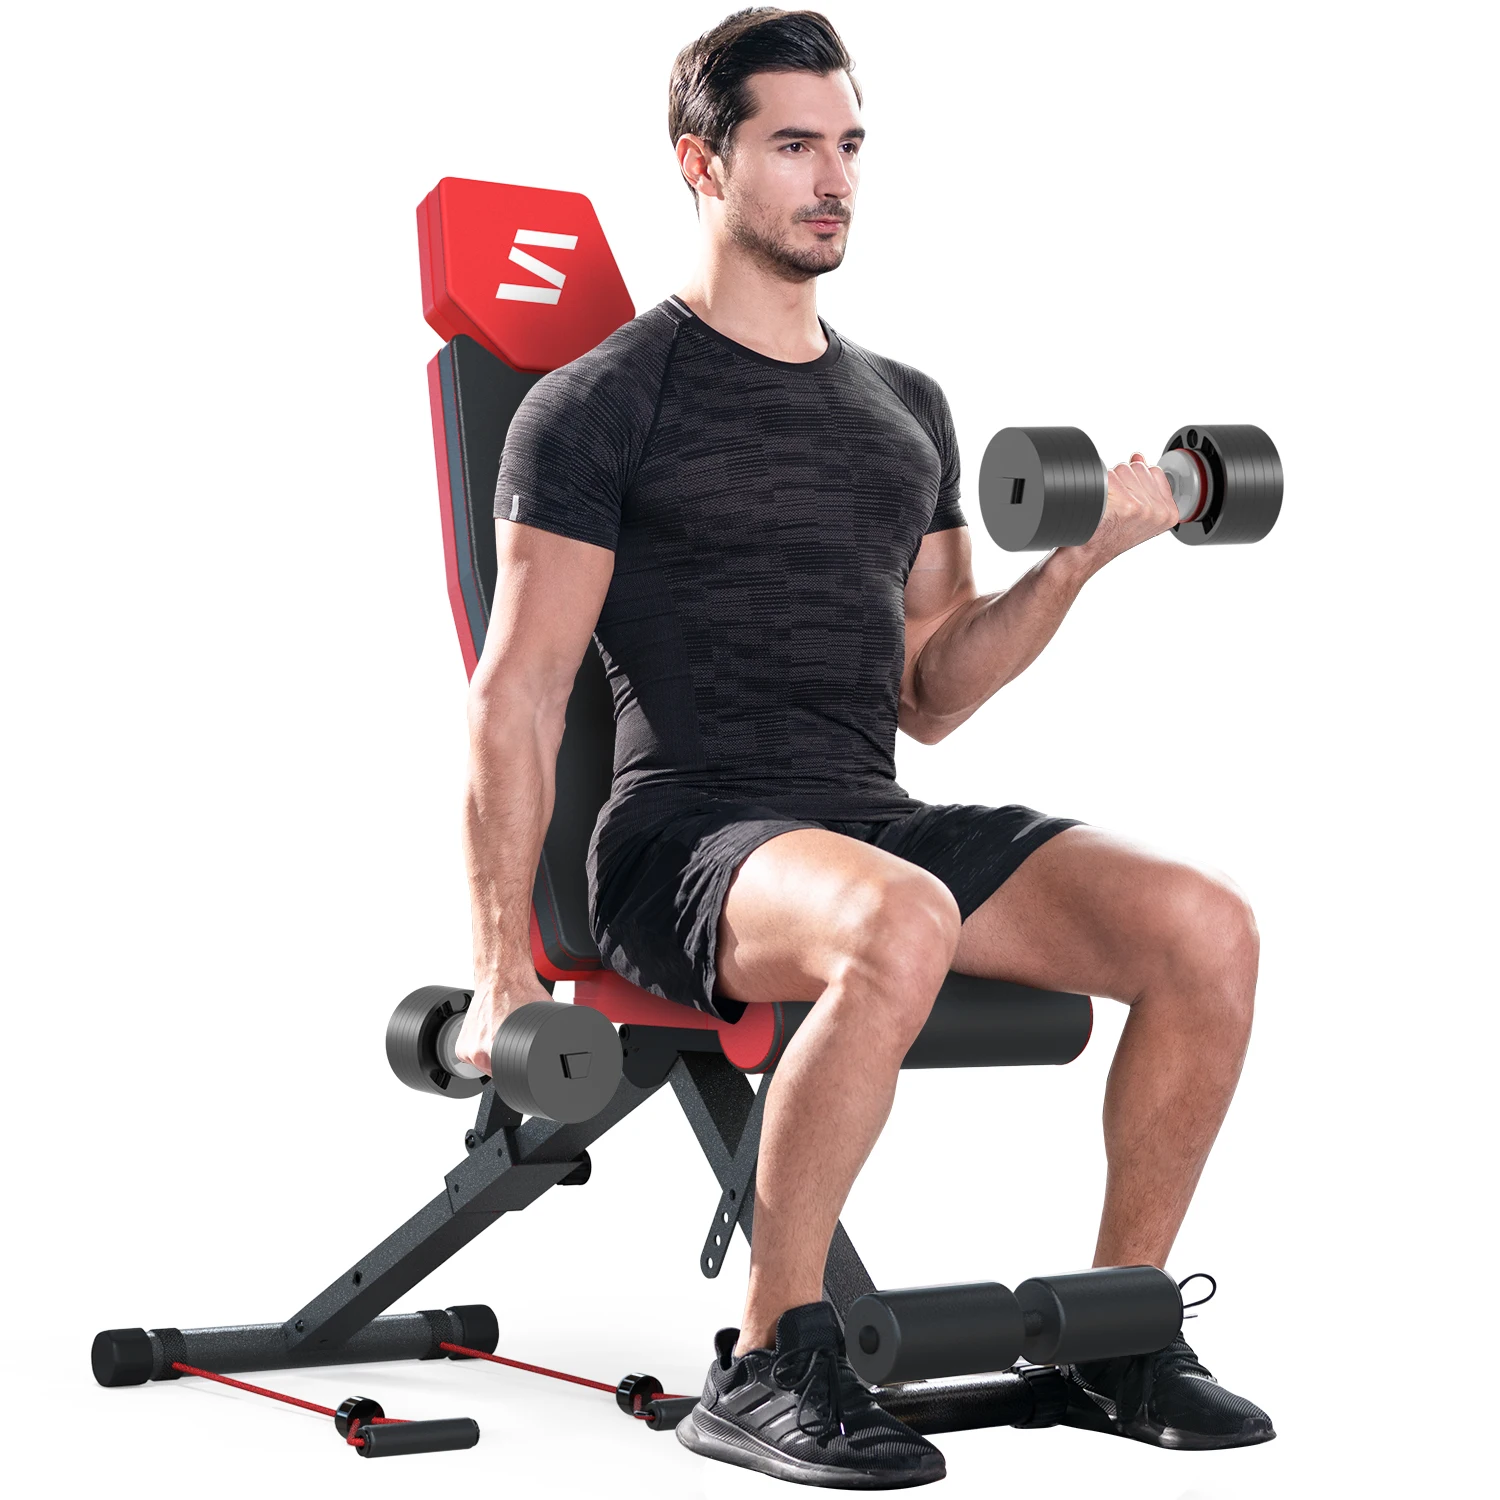 

snode Wholesale dumbbell Folding Home fitness professional exercise weight lifting bench Press Stool Fitness chair bench, Black + red